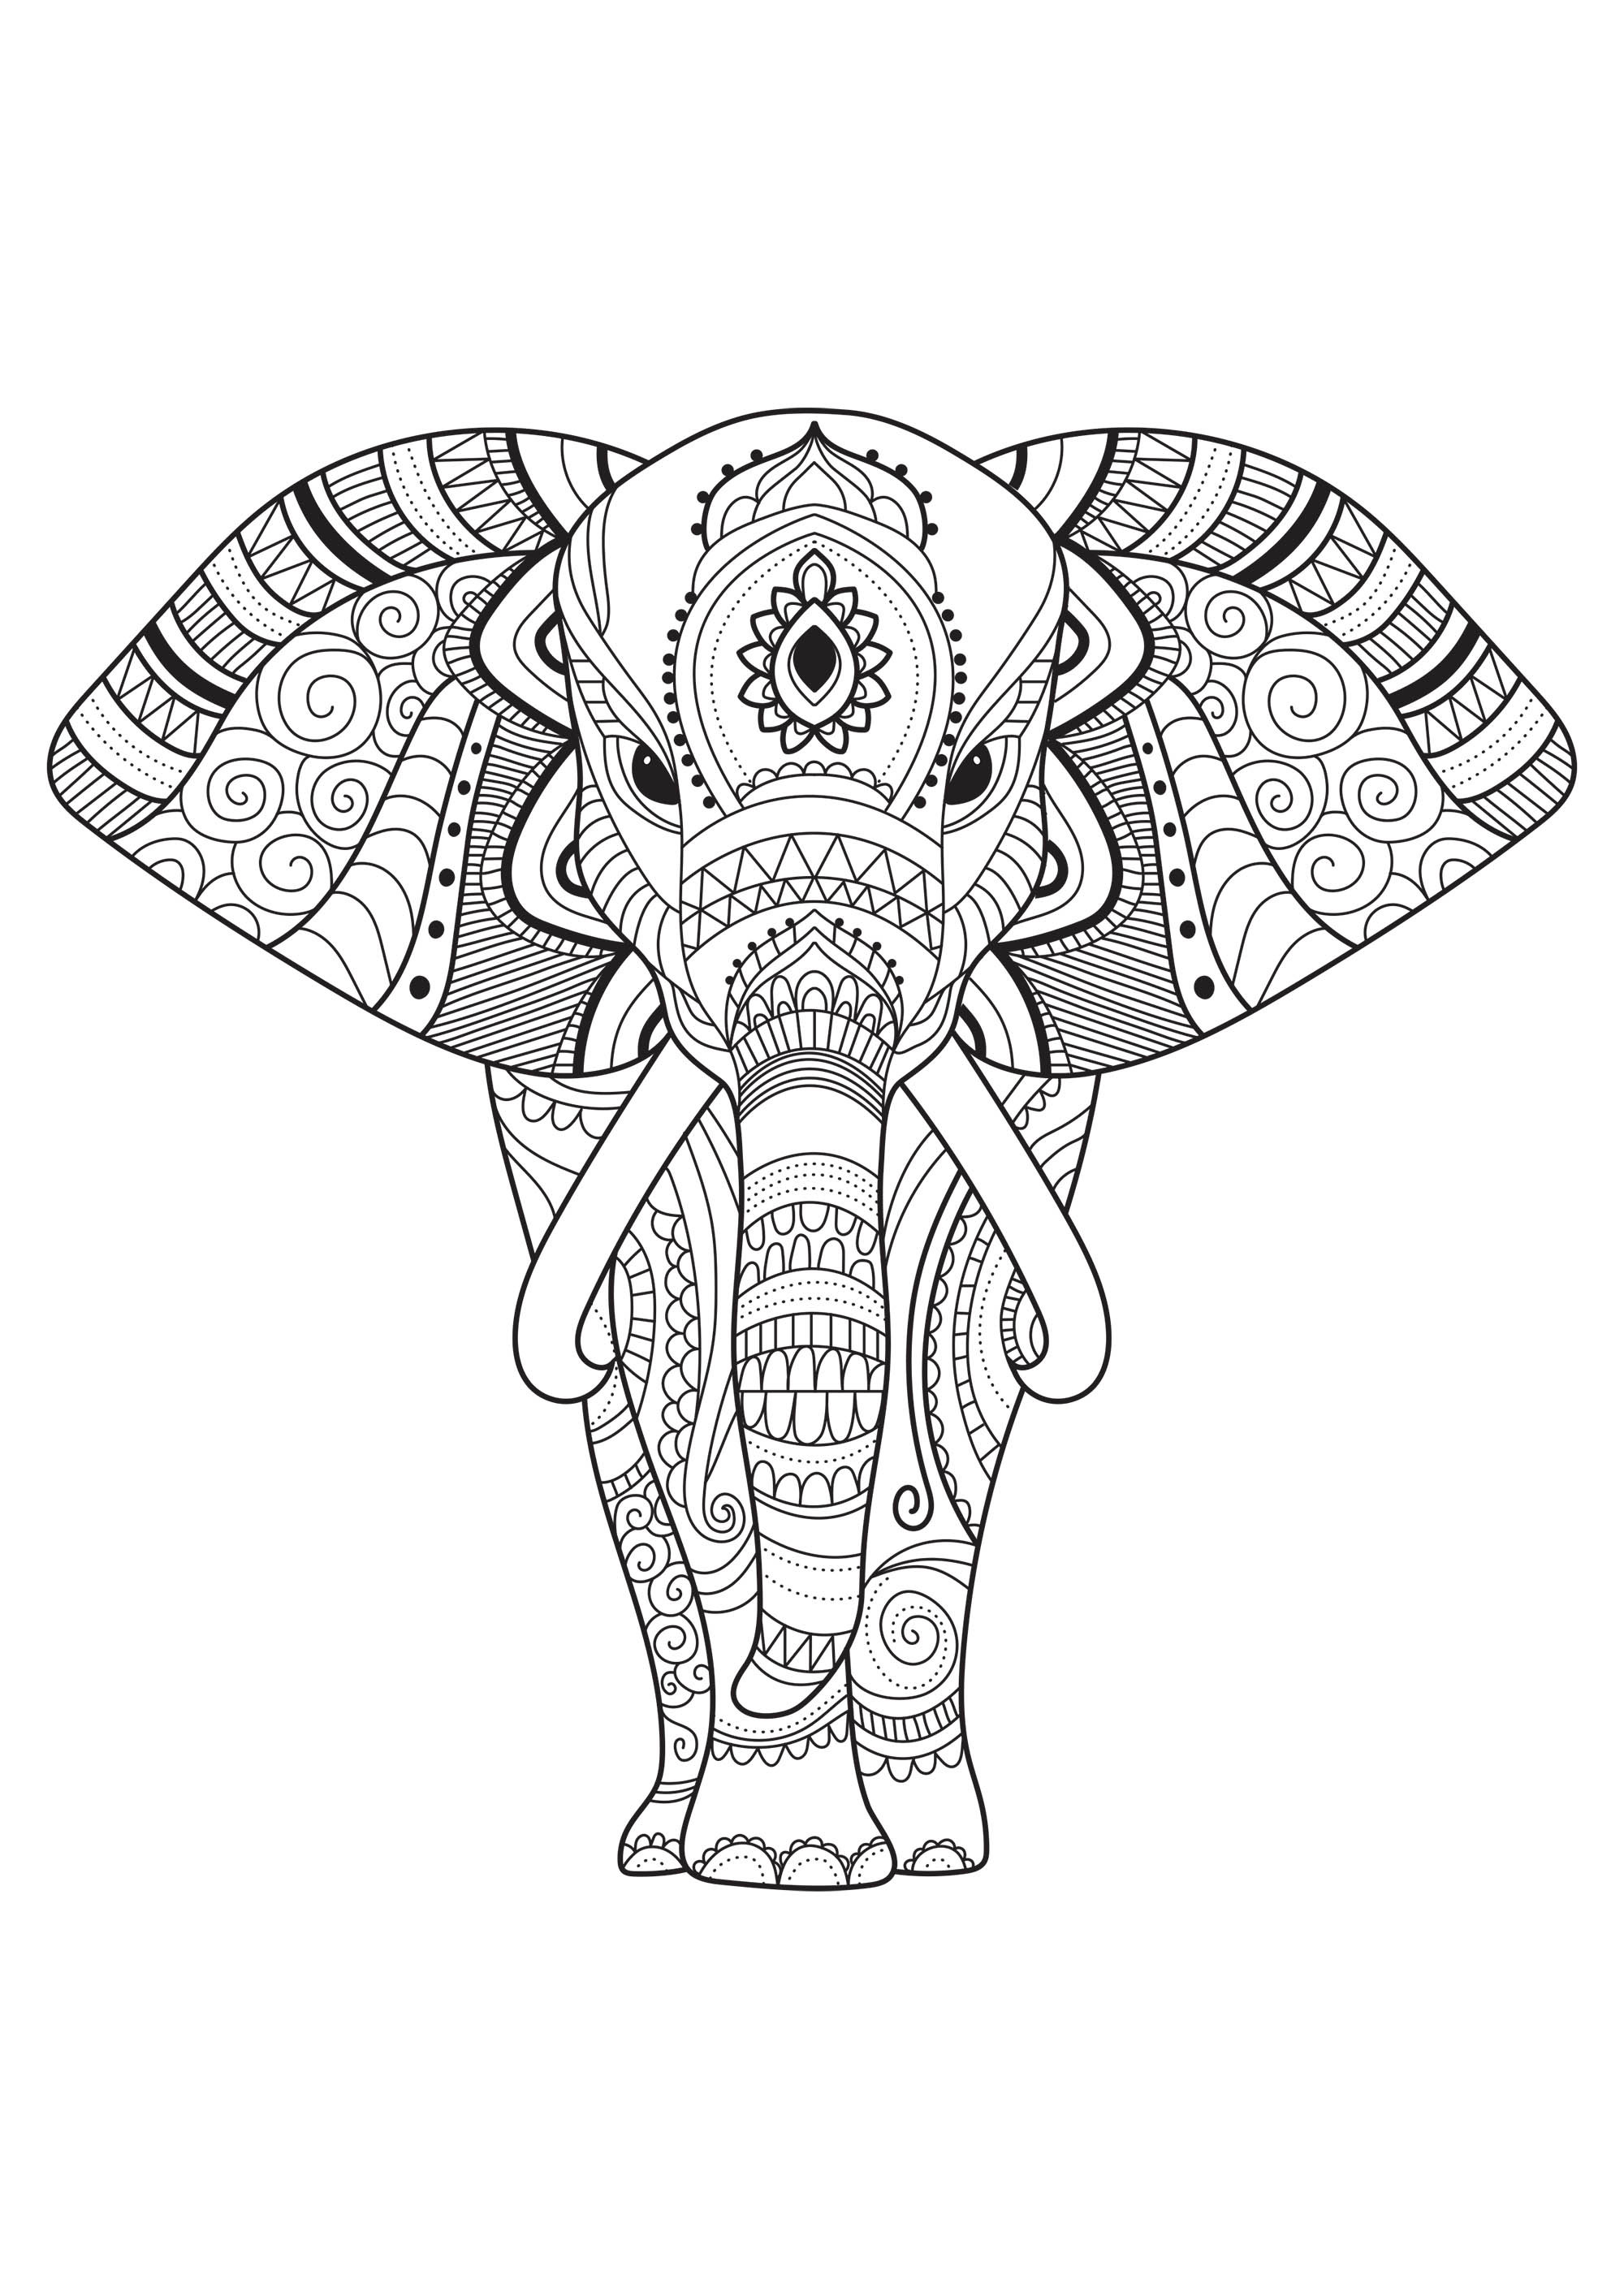 Elephant Coloring Book For Adults
 Elephant with simple patterns Elephants Adult Coloring Pages